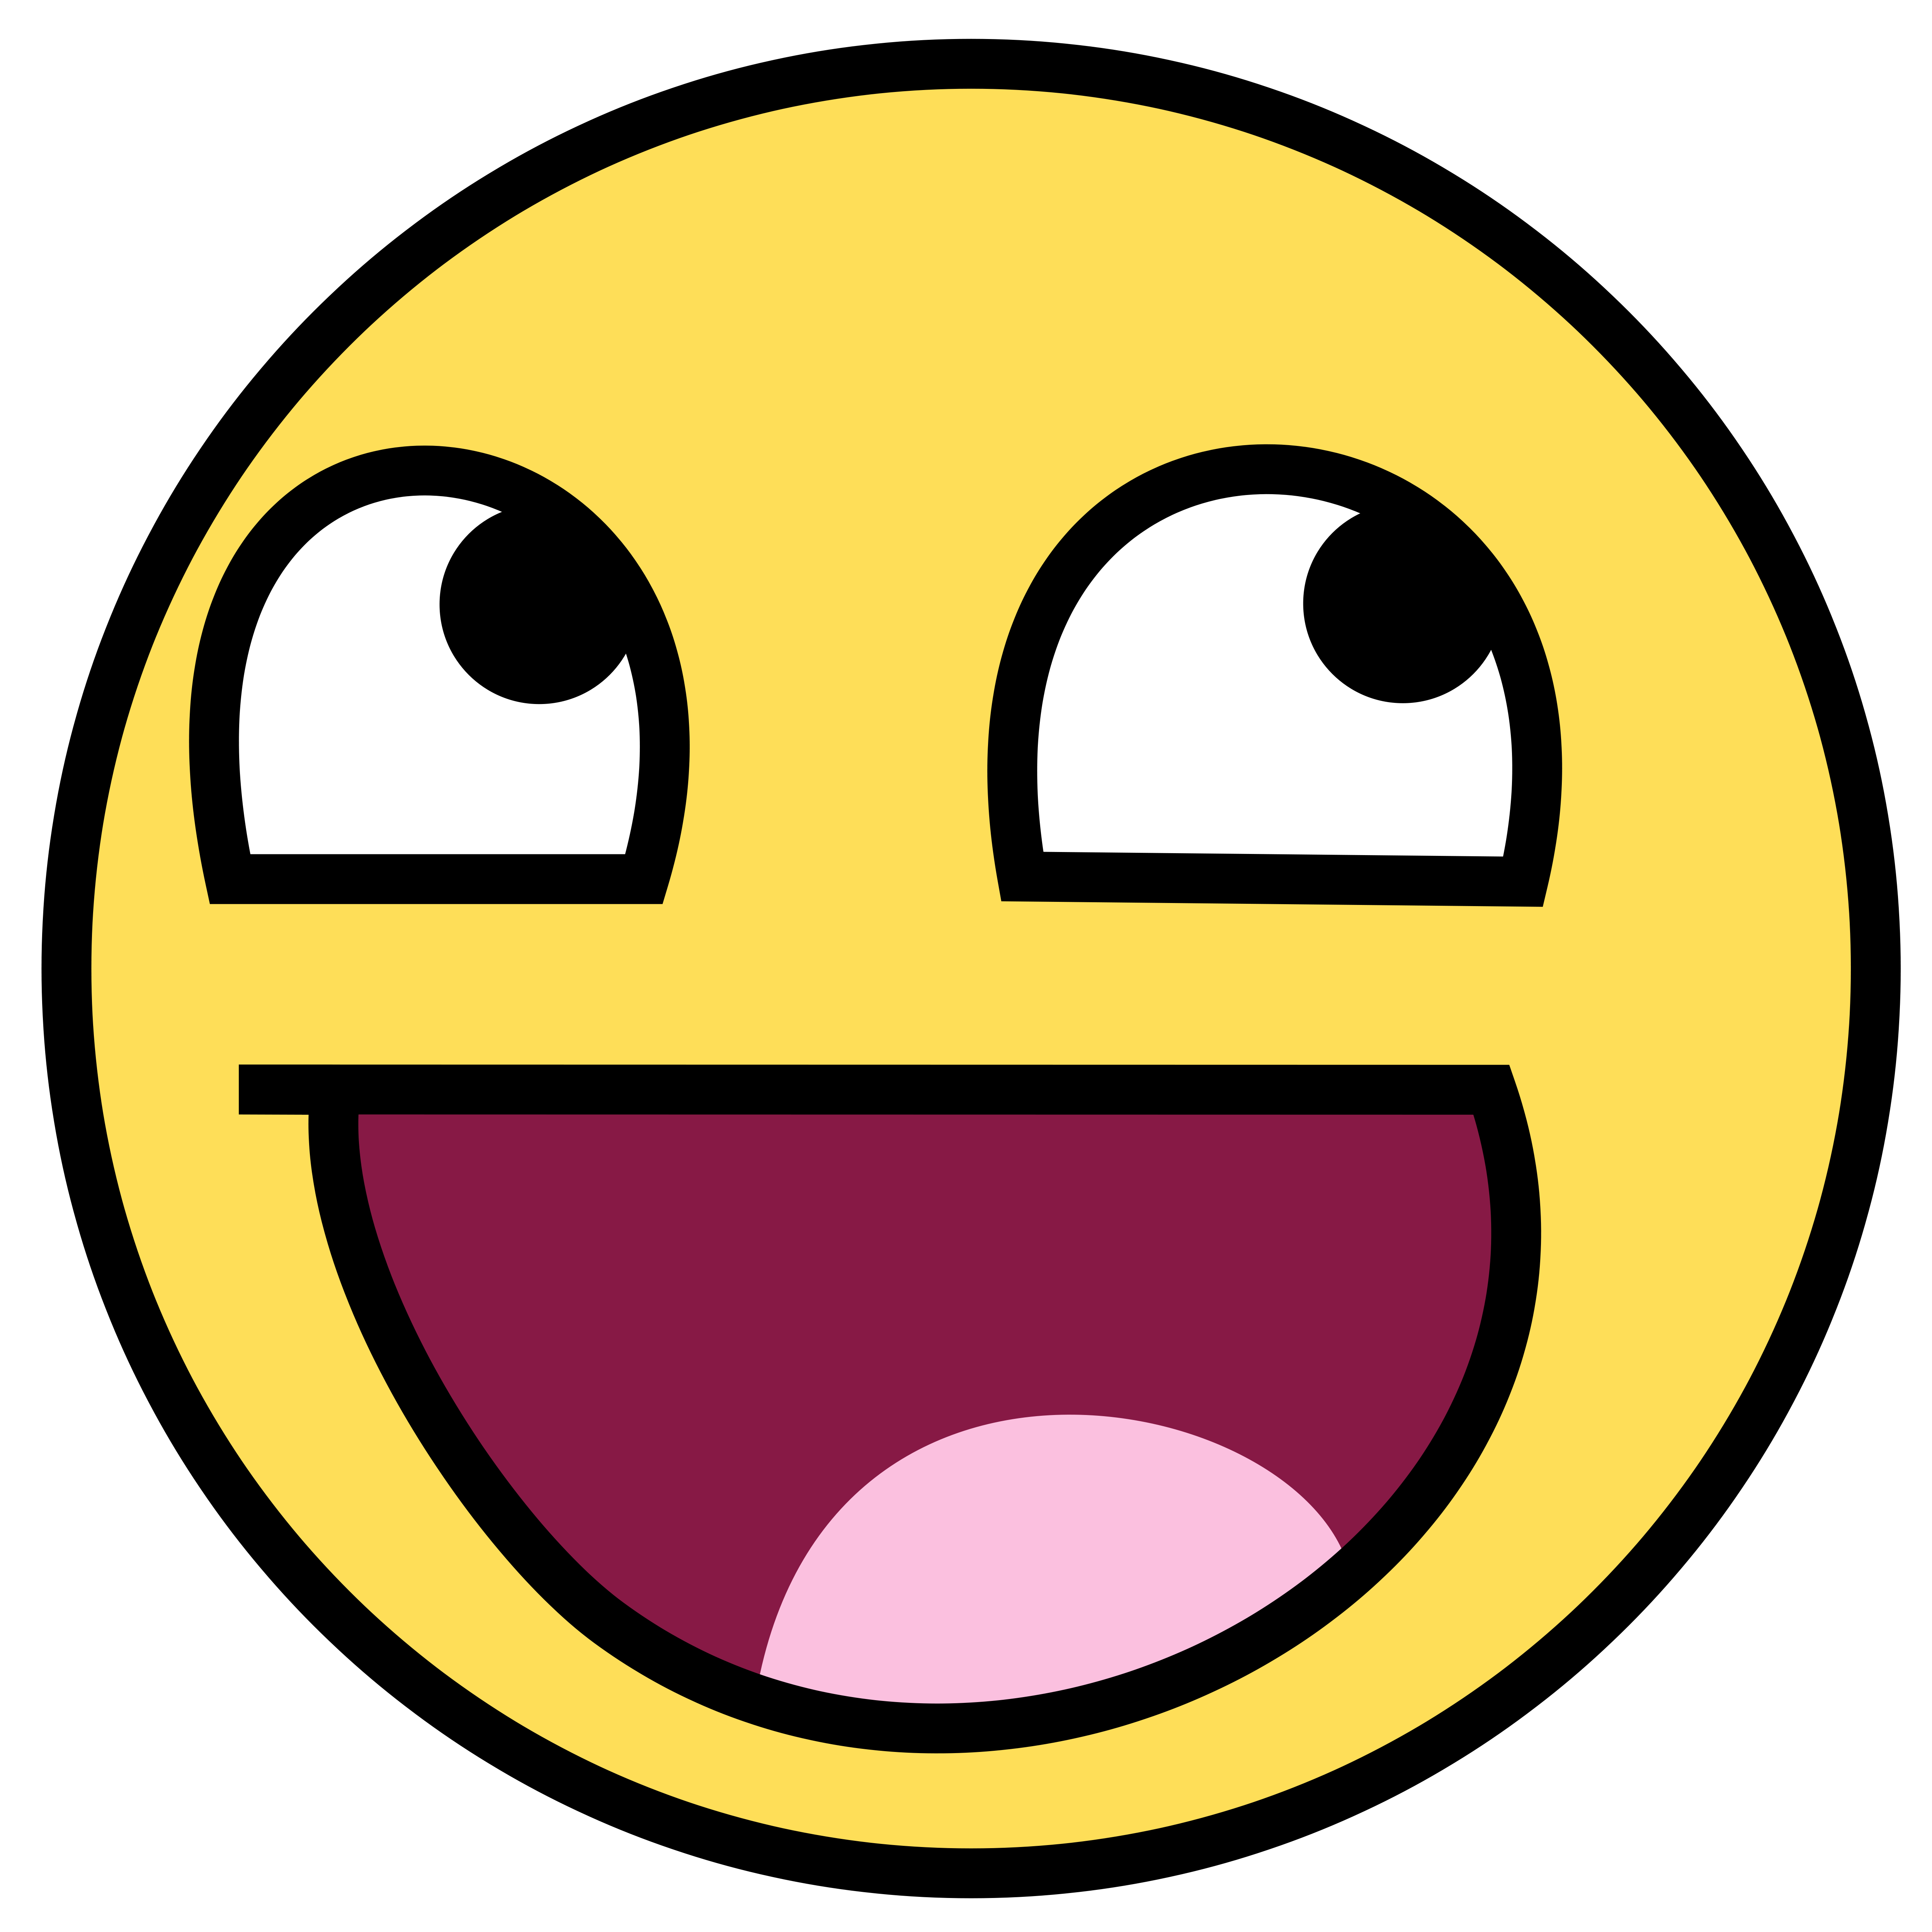 [Image: awesome_face_by_rober_raik-d4cltkg.png]